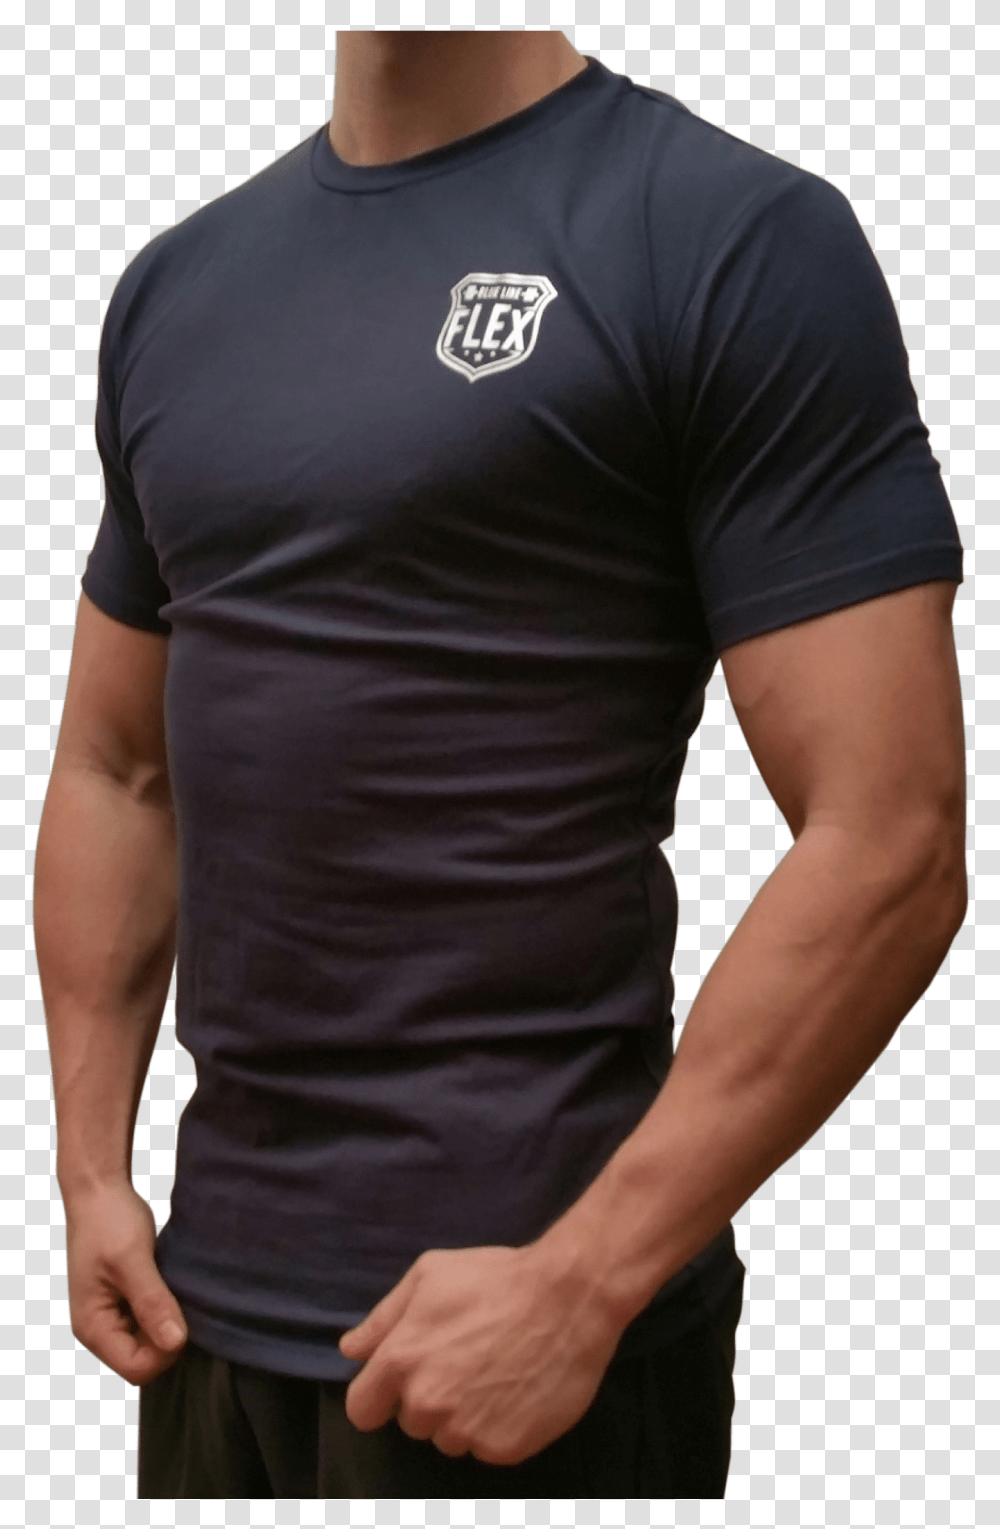 Police T Shirts Navy Thin Blue Line Shirt Active Shirt, Apparel, Sleeve, Person Transparent Png